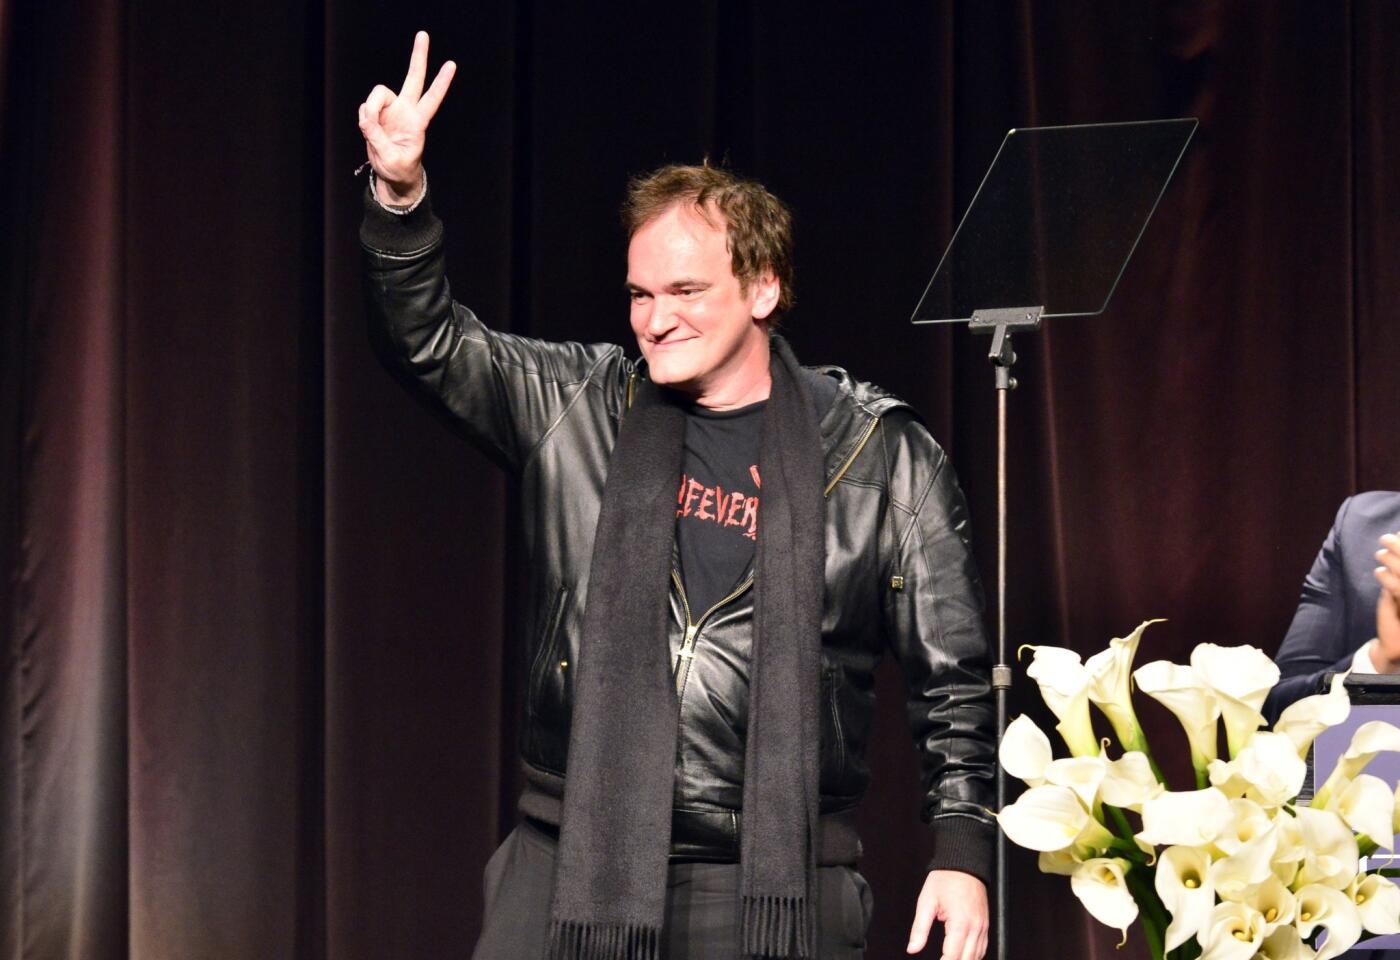 Quentin Tarantino tables 'The Hateful Eight' after script leak